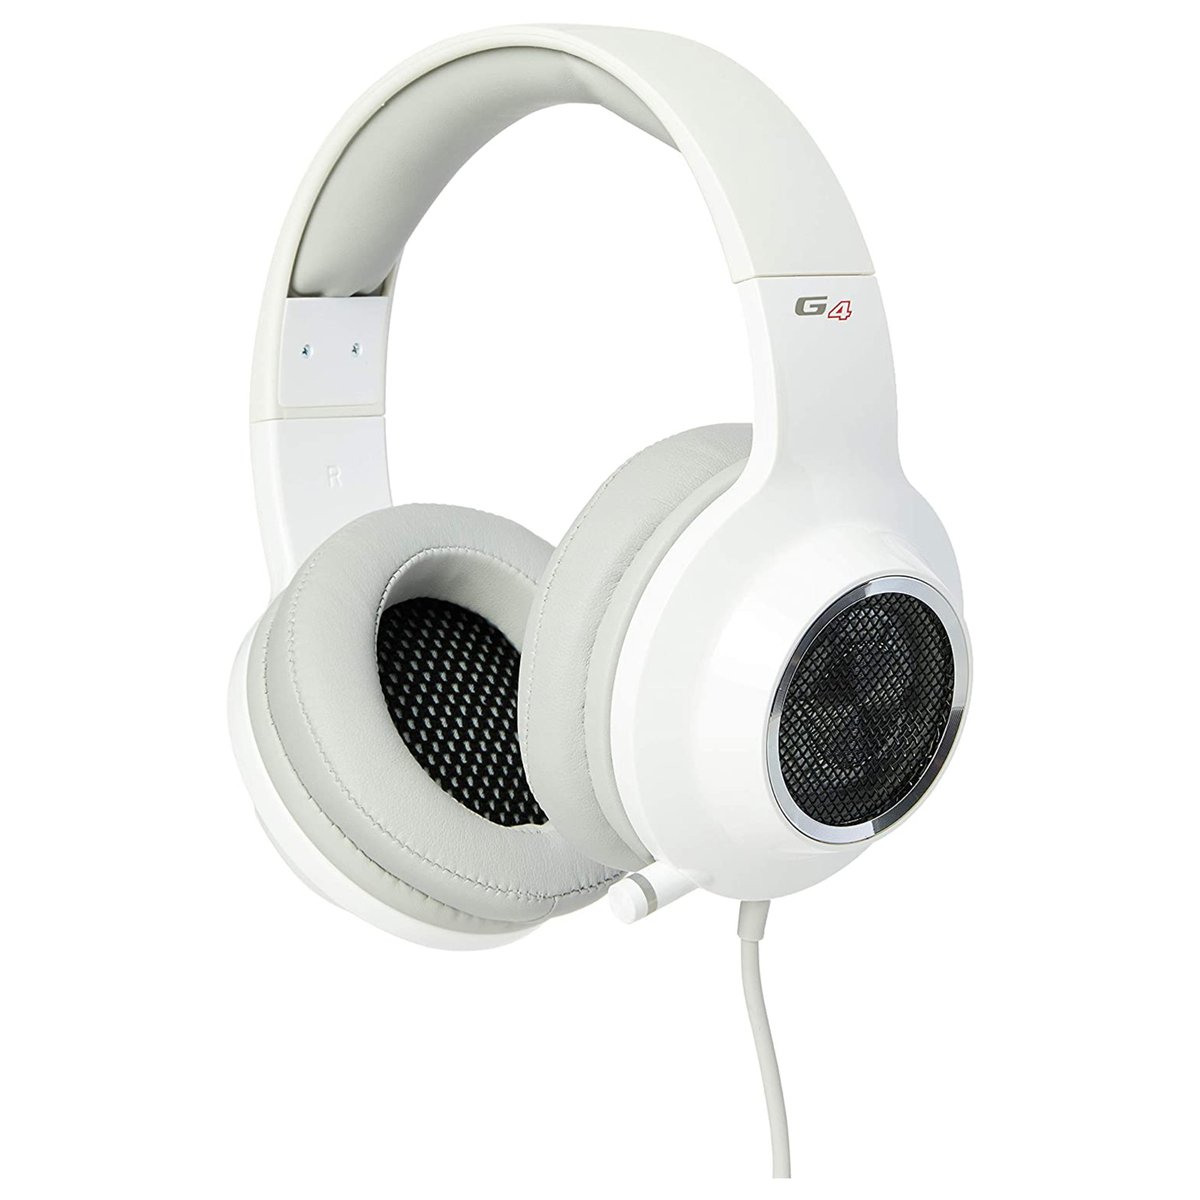 Edifier Wired Gaming Headset G4 White